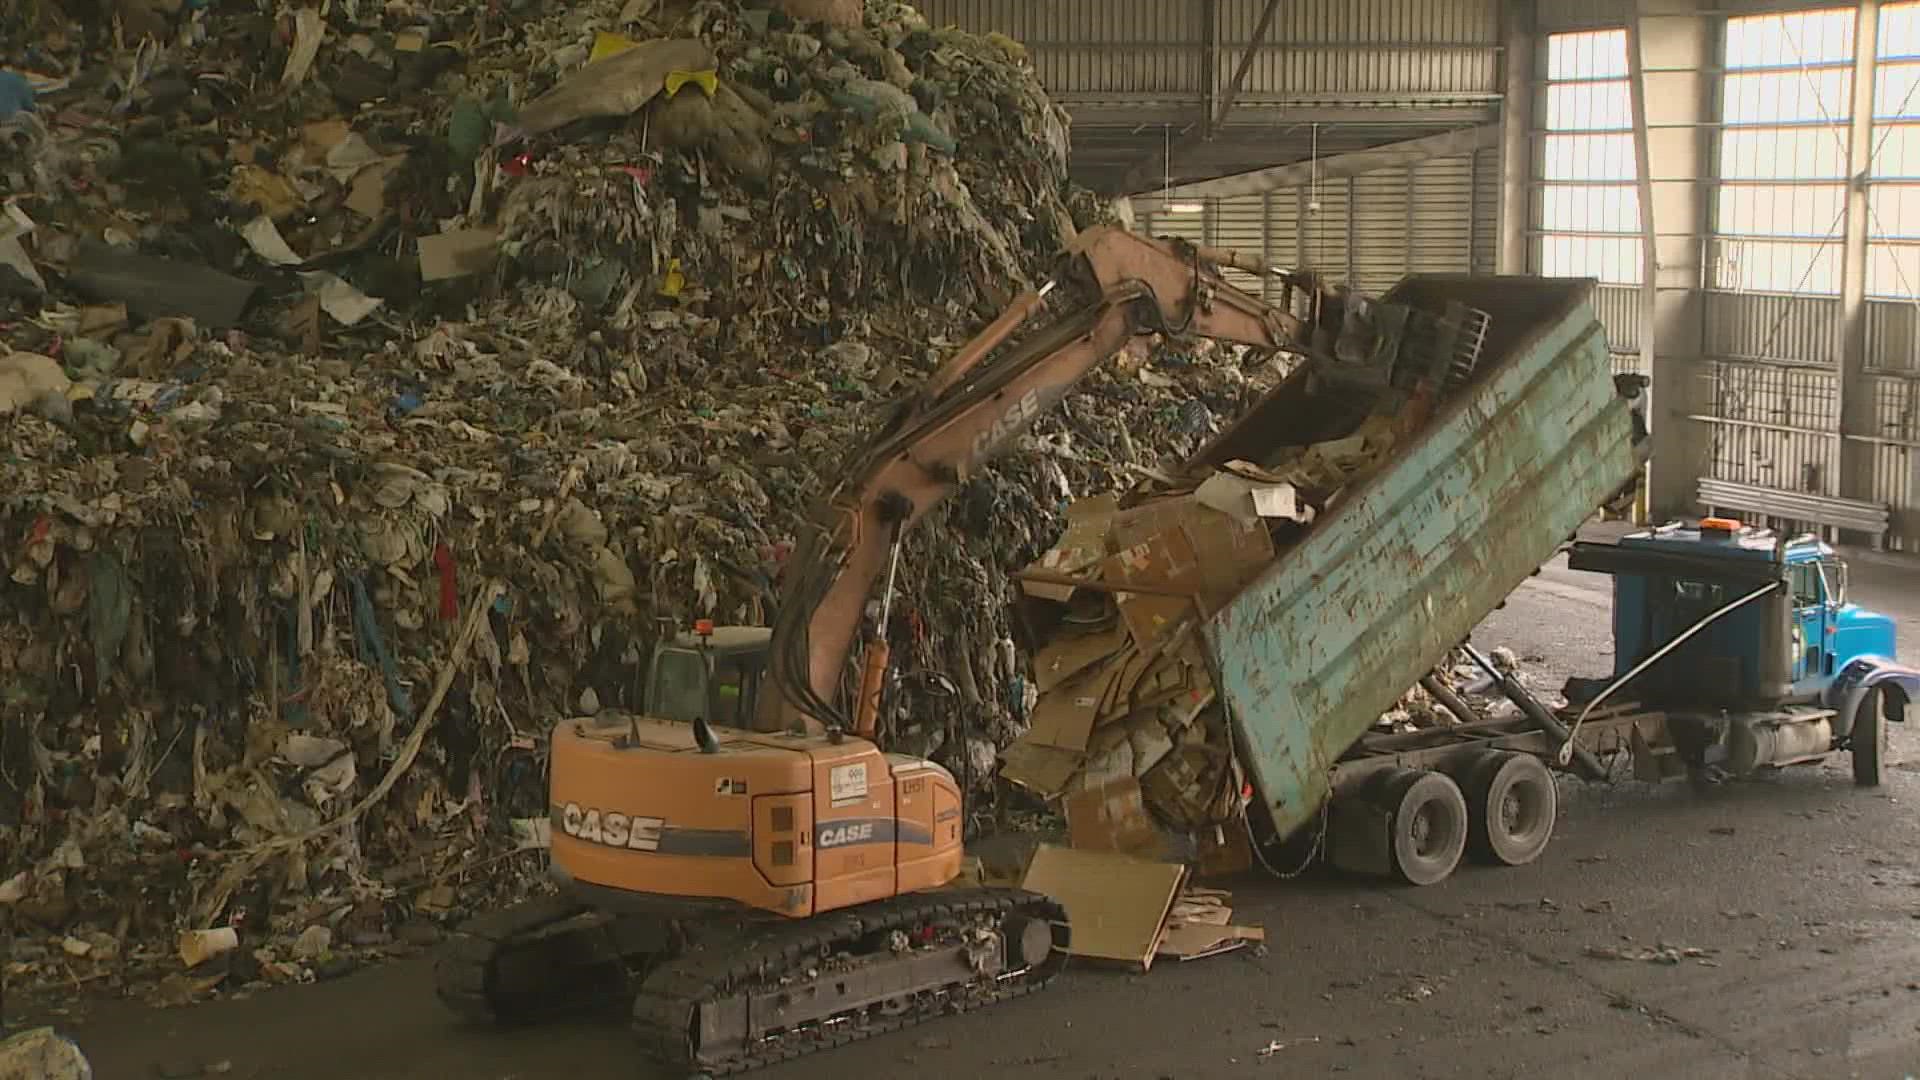 Crews cleared more than 10 million pounds of backlogged garbage from Snohomish County facilities that had become a “health, safety and environmental issue